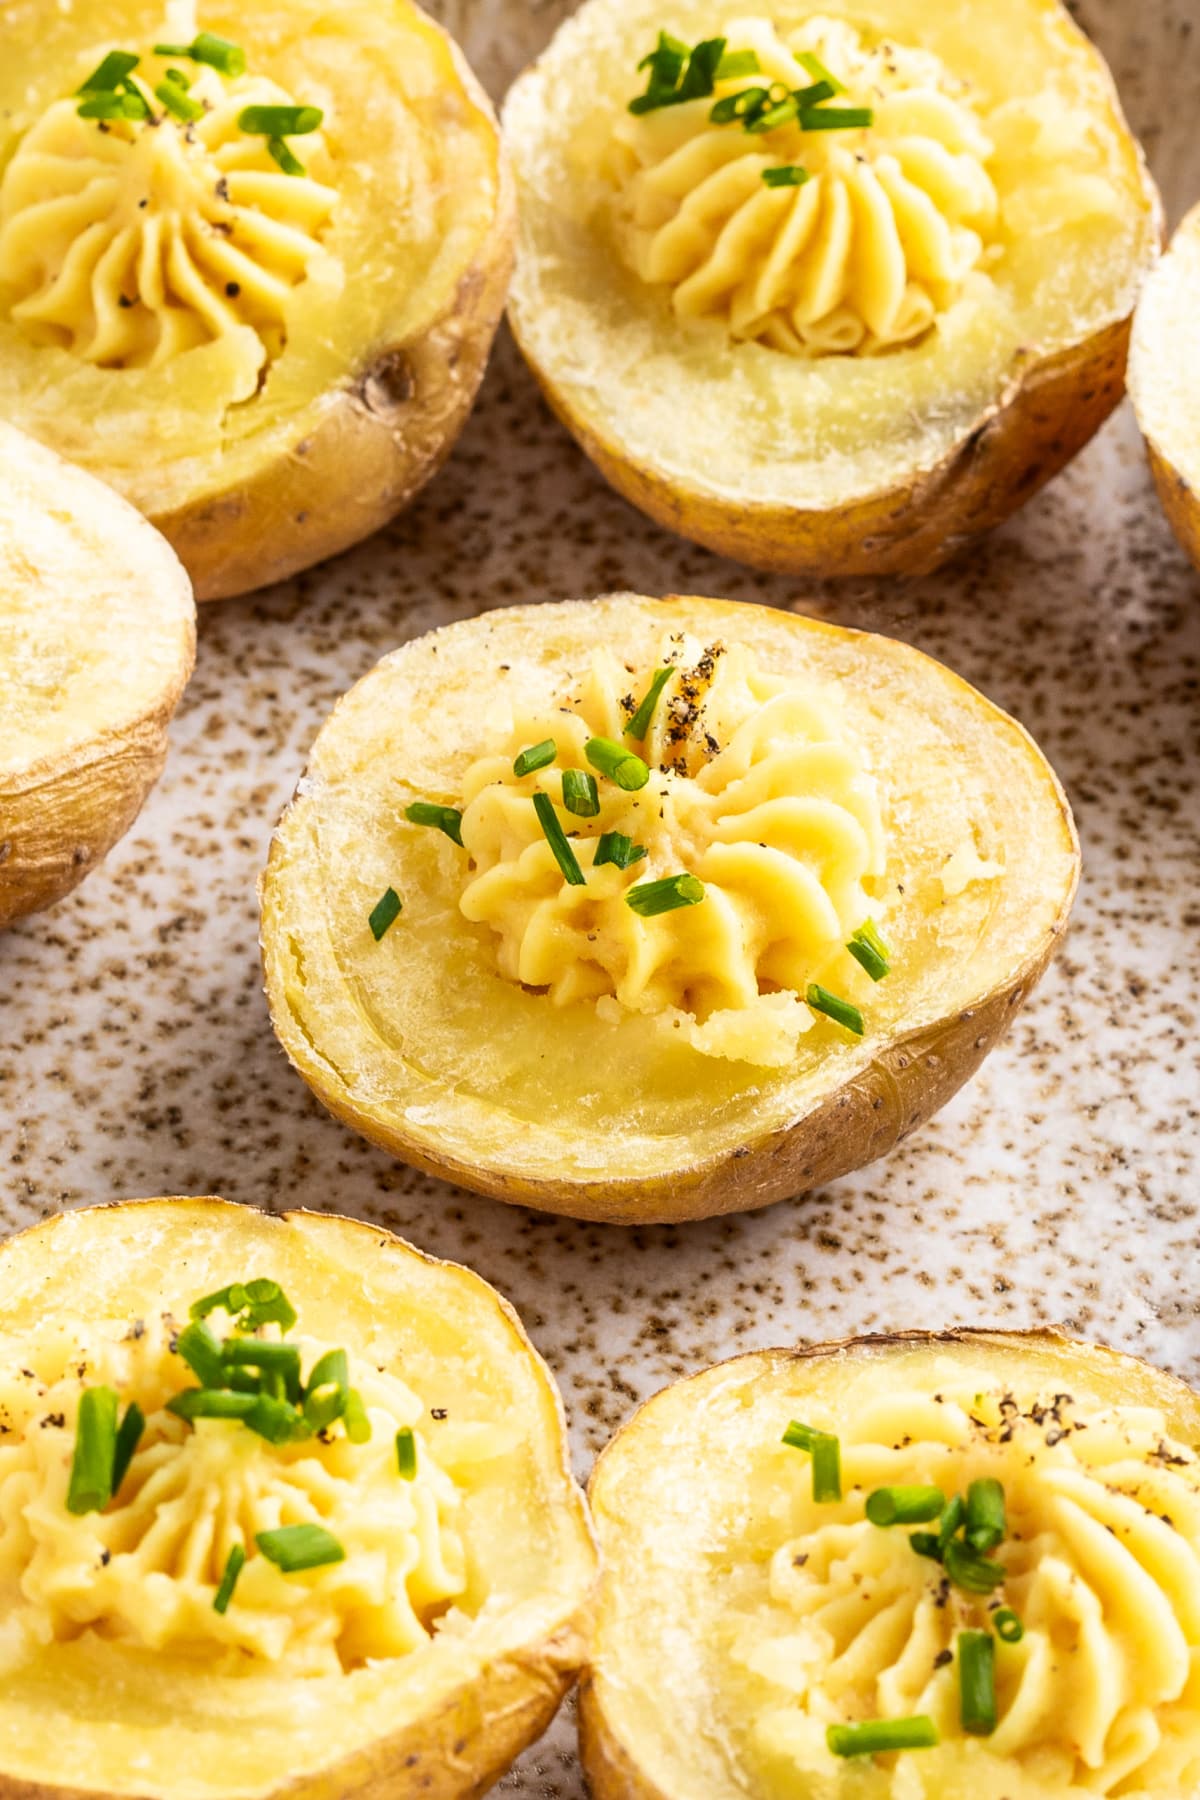 Close up of mini gold potatoes sliced in half, baked, scooped out and filled with a deviled egg flavored mixture. These deviled potatoes are sitting on a tan speckled dish for serving.